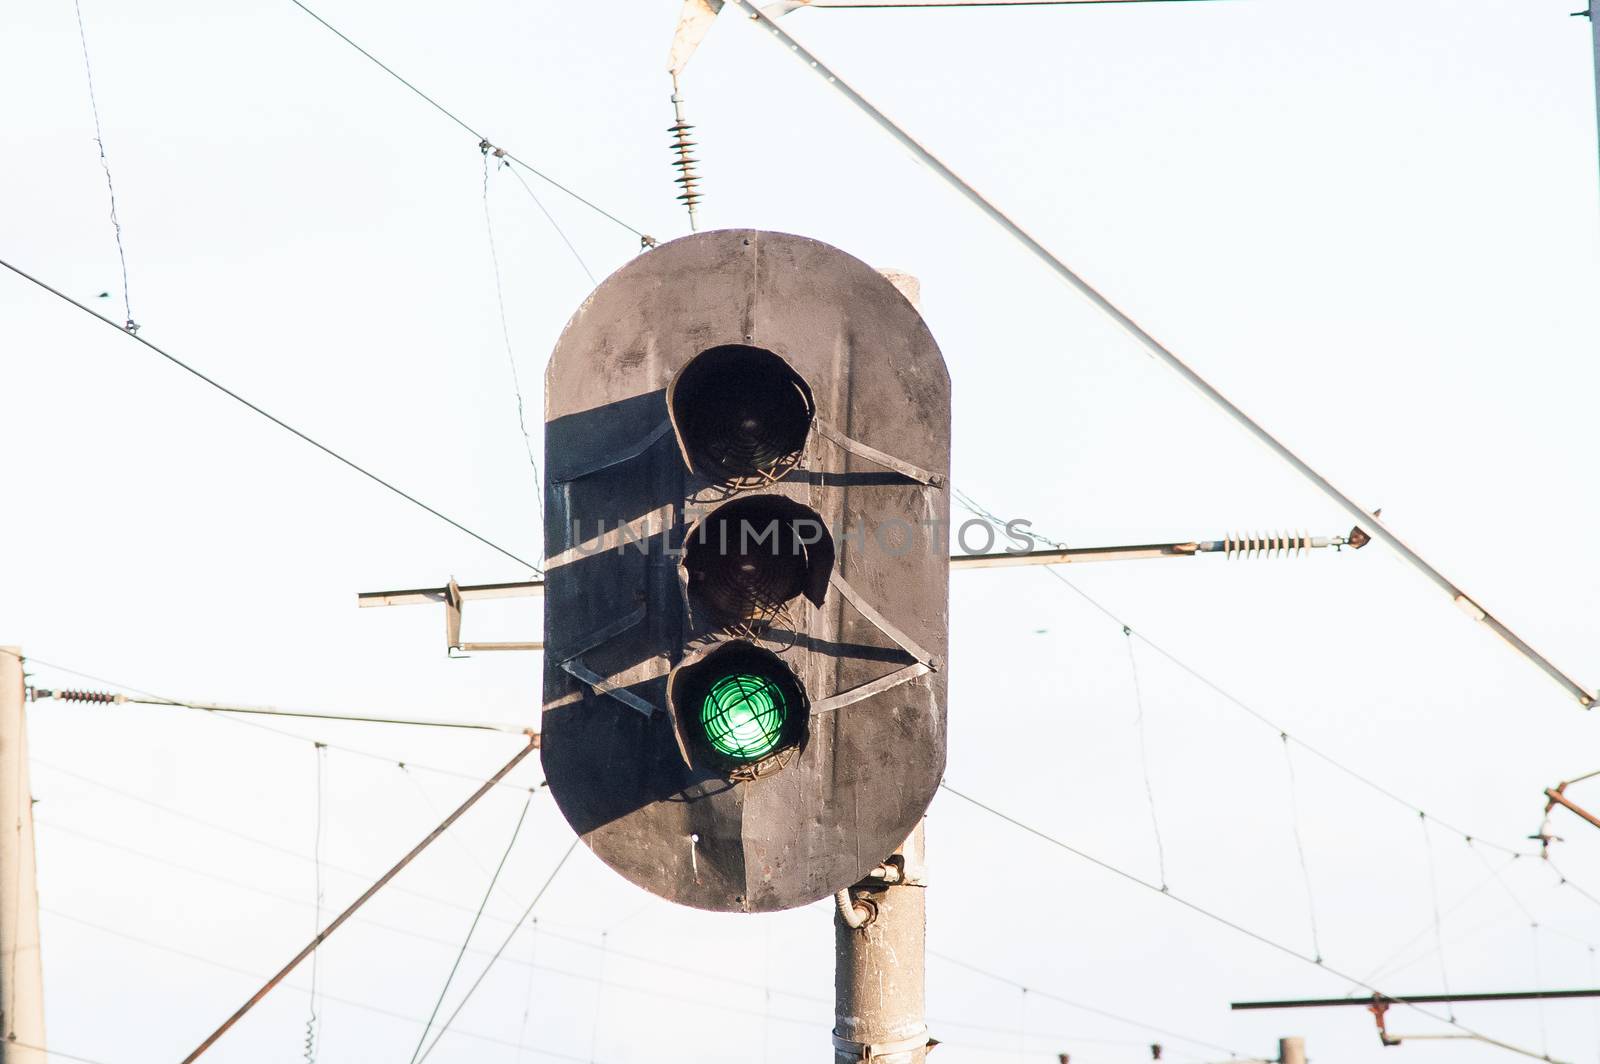 oval light with green light on the railroad